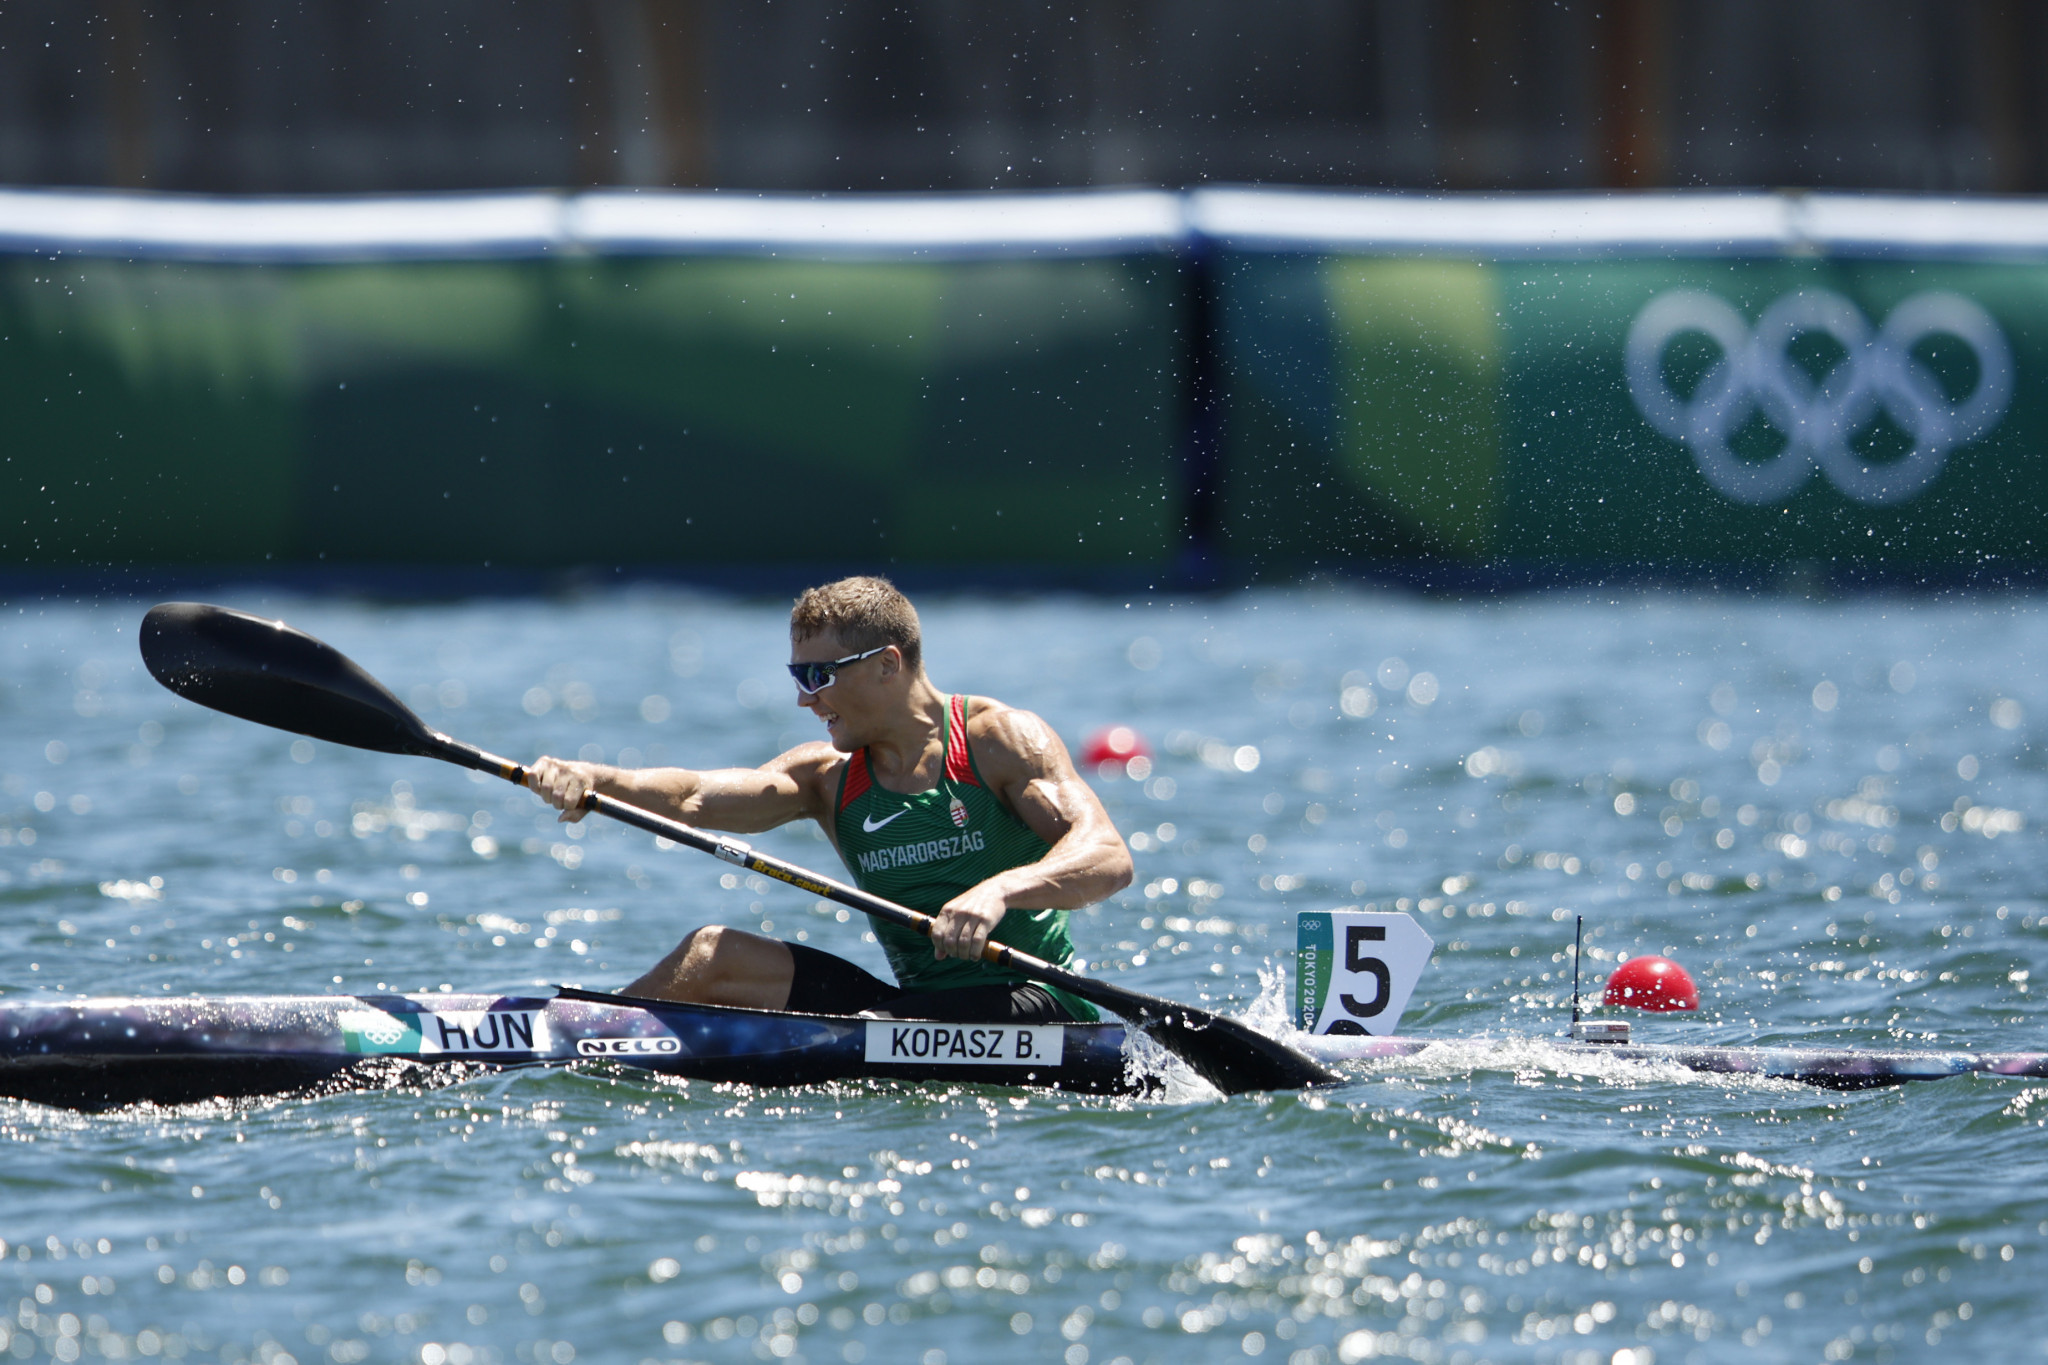 The 2021 ICF Canoe and Para Canoe Sprint World Championships get underway tomorrow, with Hungary's Bálint Kopasz looking to add to his K1 1,000m Olympic gold ©Getty Images